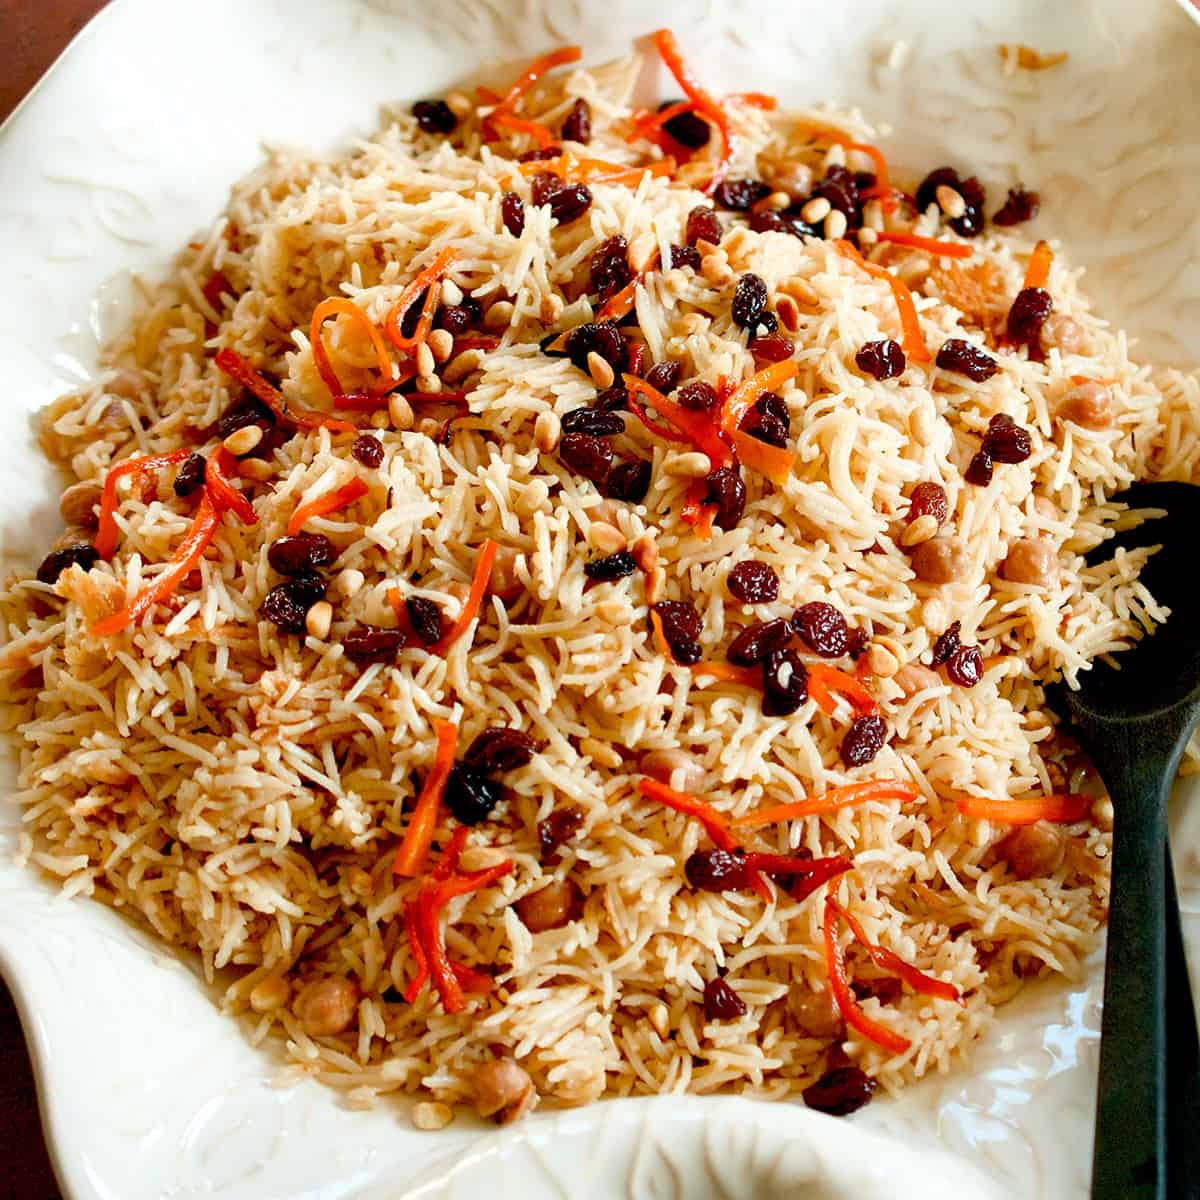 Kabuli pulao (chickpea pilaf), garnished with dark raisins, orange carrots and crunchy pine nuts, is plated in an off-white platter with dark wood spoons.